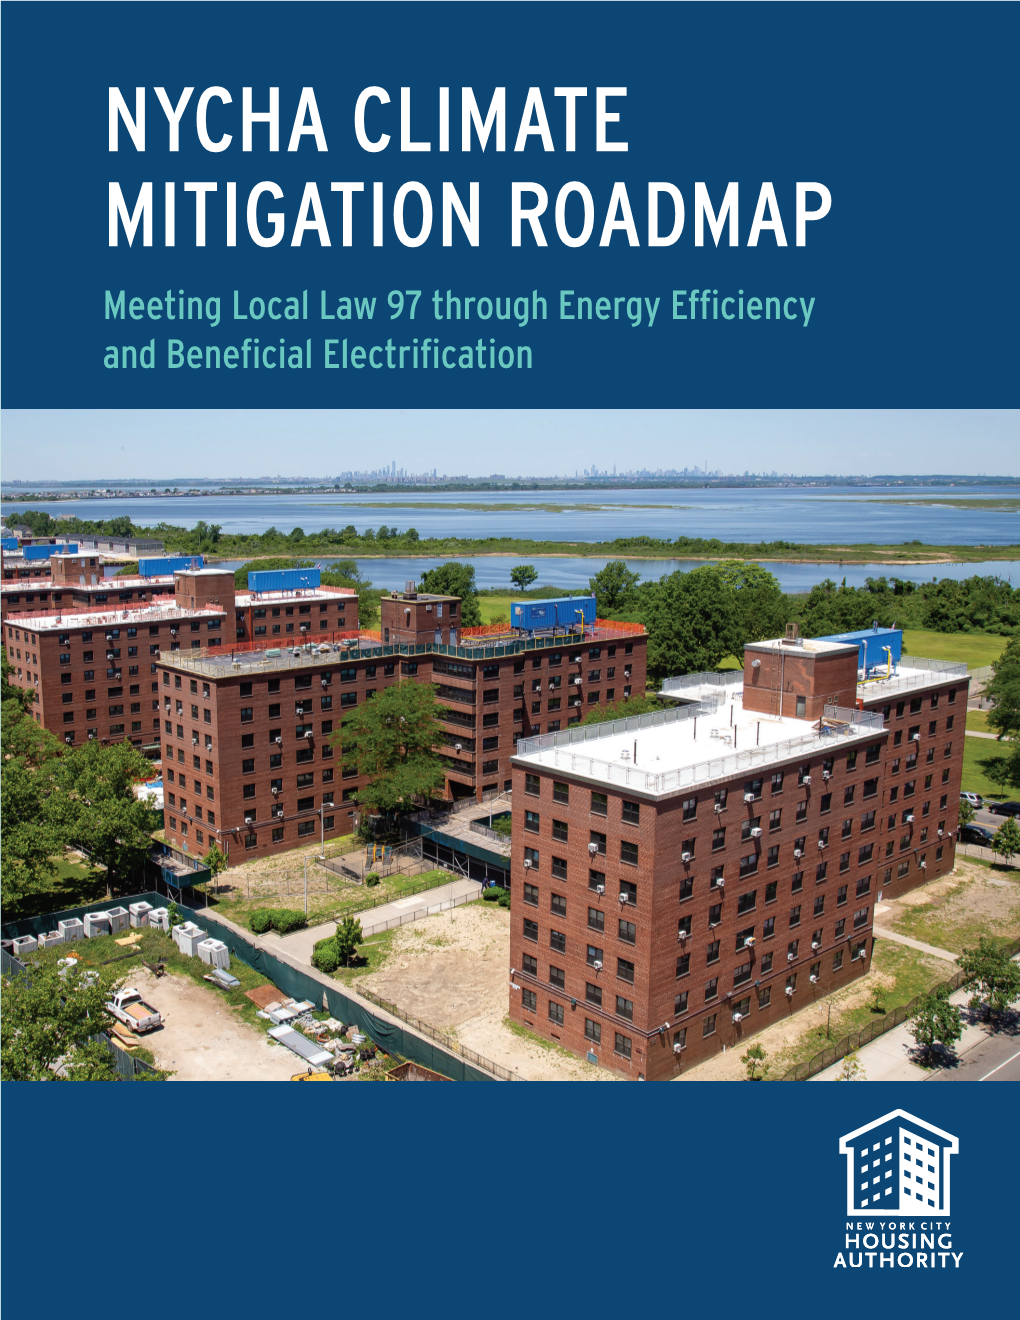 NYCHA CLIMATE MITIGATION ROADMAP Meeting Local Law 97 Through Energy Efficiency and Beneficial Electrification